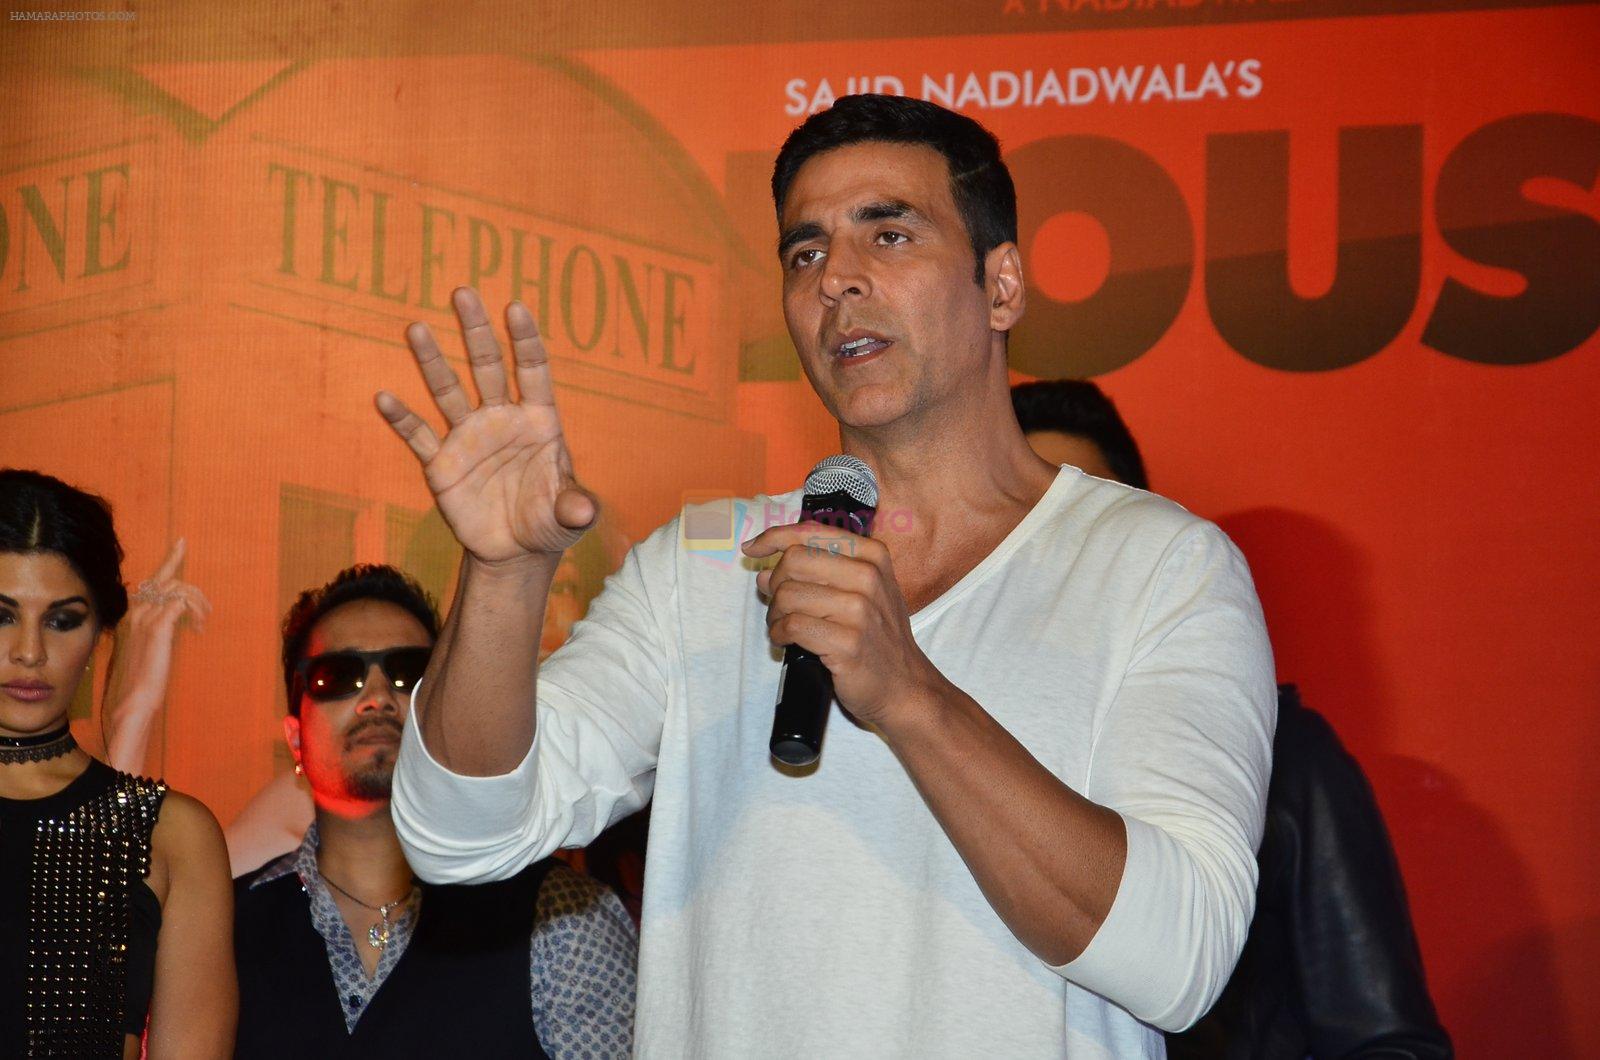 Akshay Kumar at the Launch of the song Taang Uthake from the film Housefull 3 on 6th May 2016